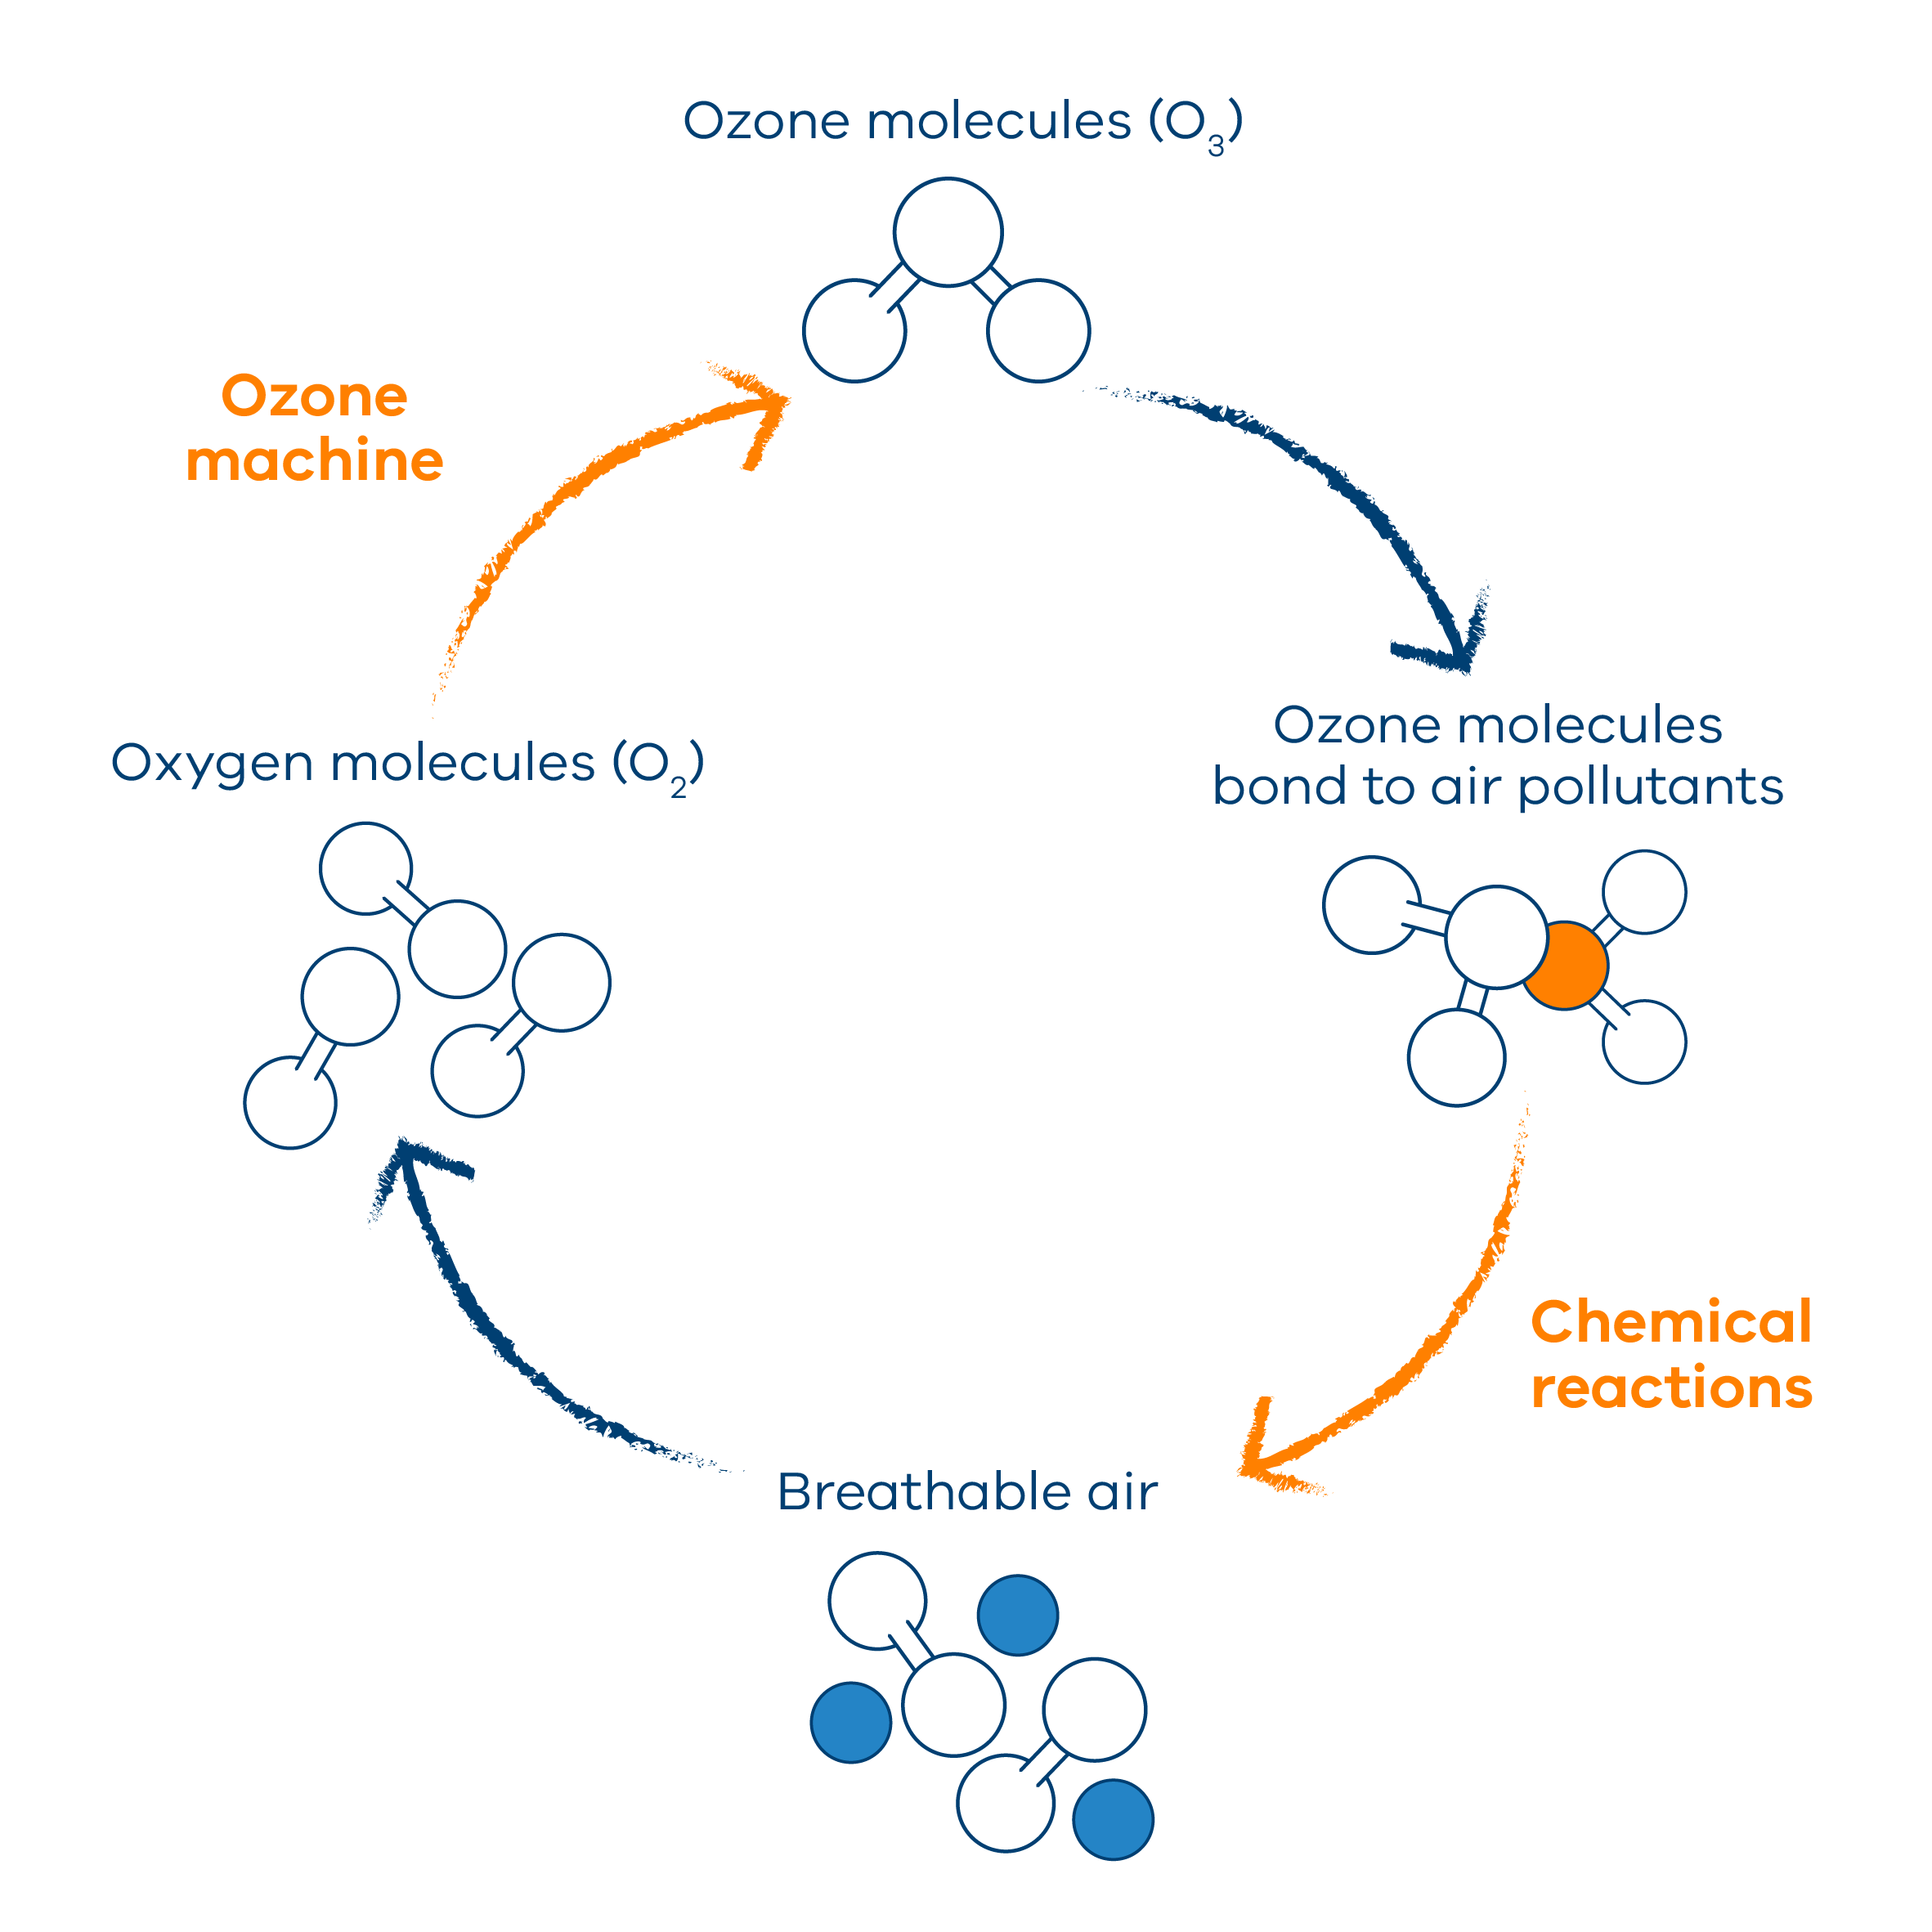 An illustrated diagram of ozone treatment chemical reactions.